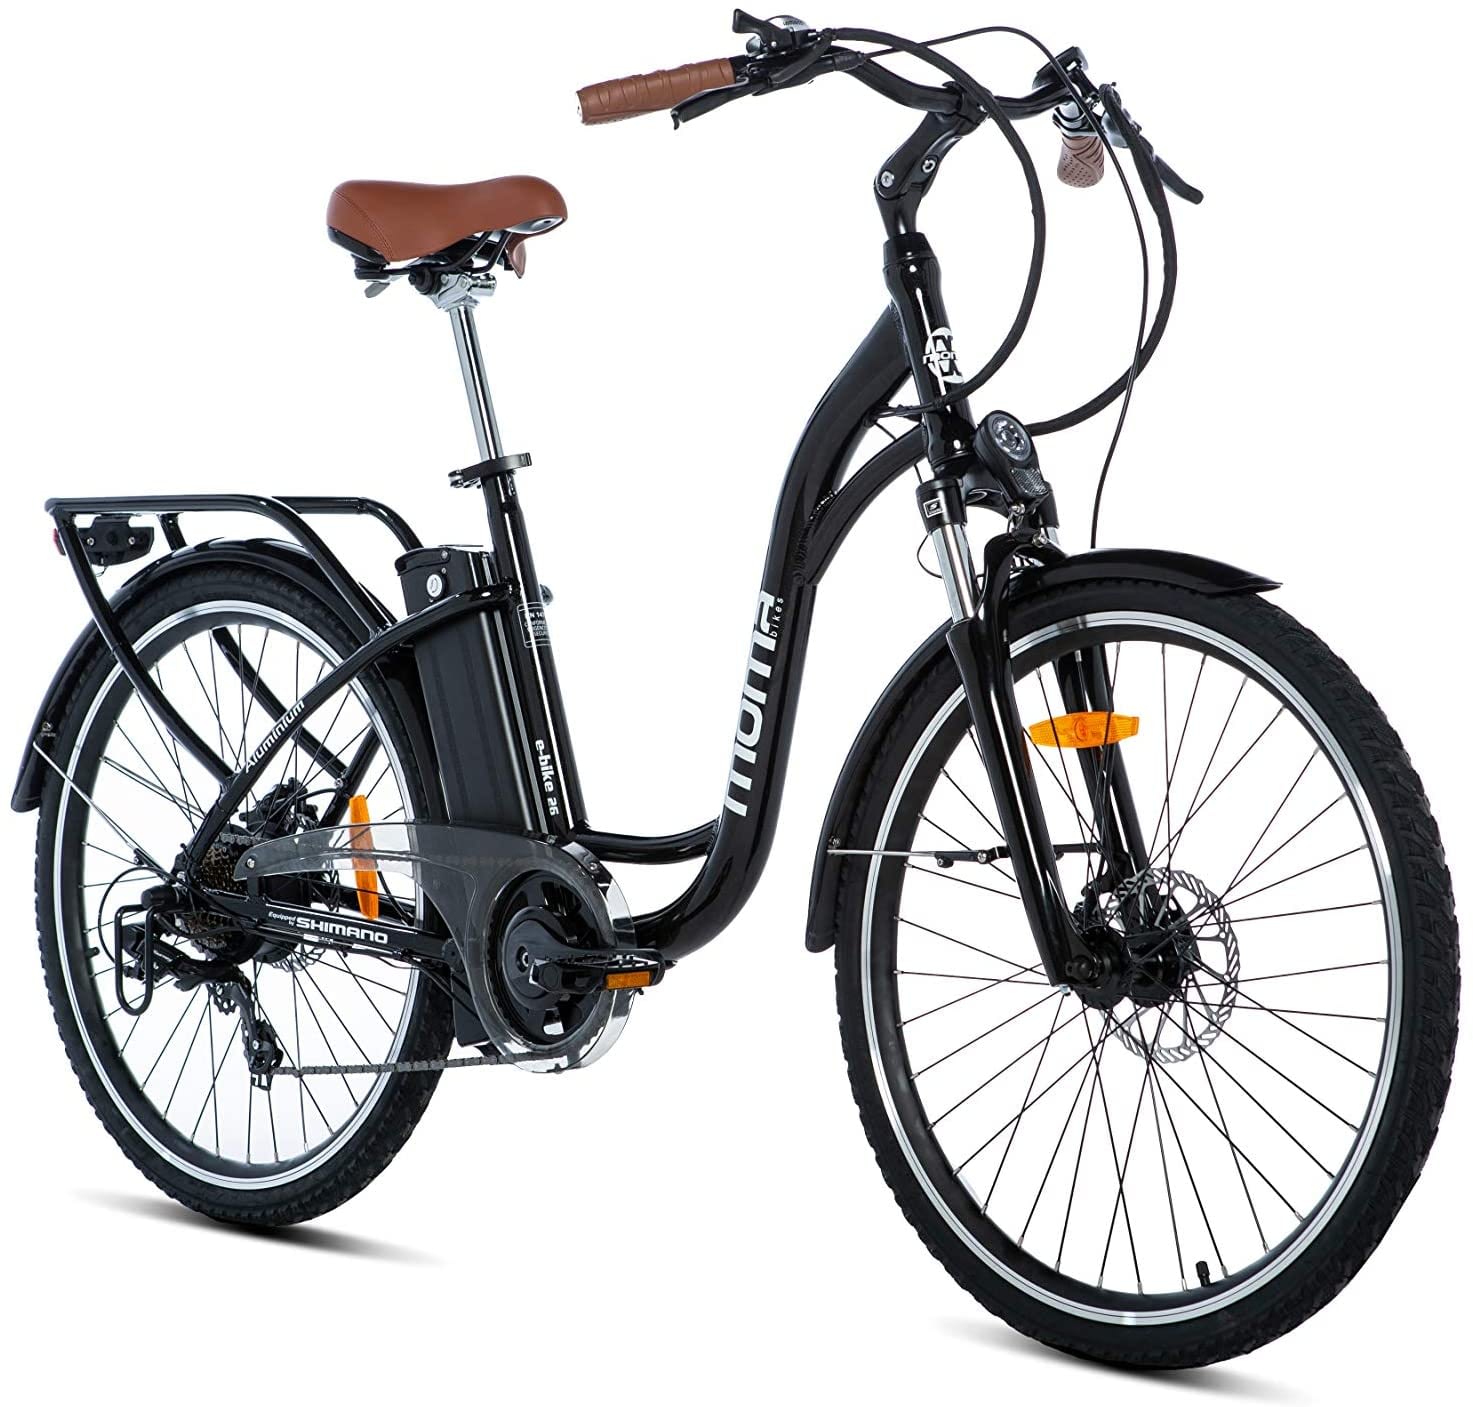 Moma-Bikes-Unisexs-Electric-City-Bike-Review